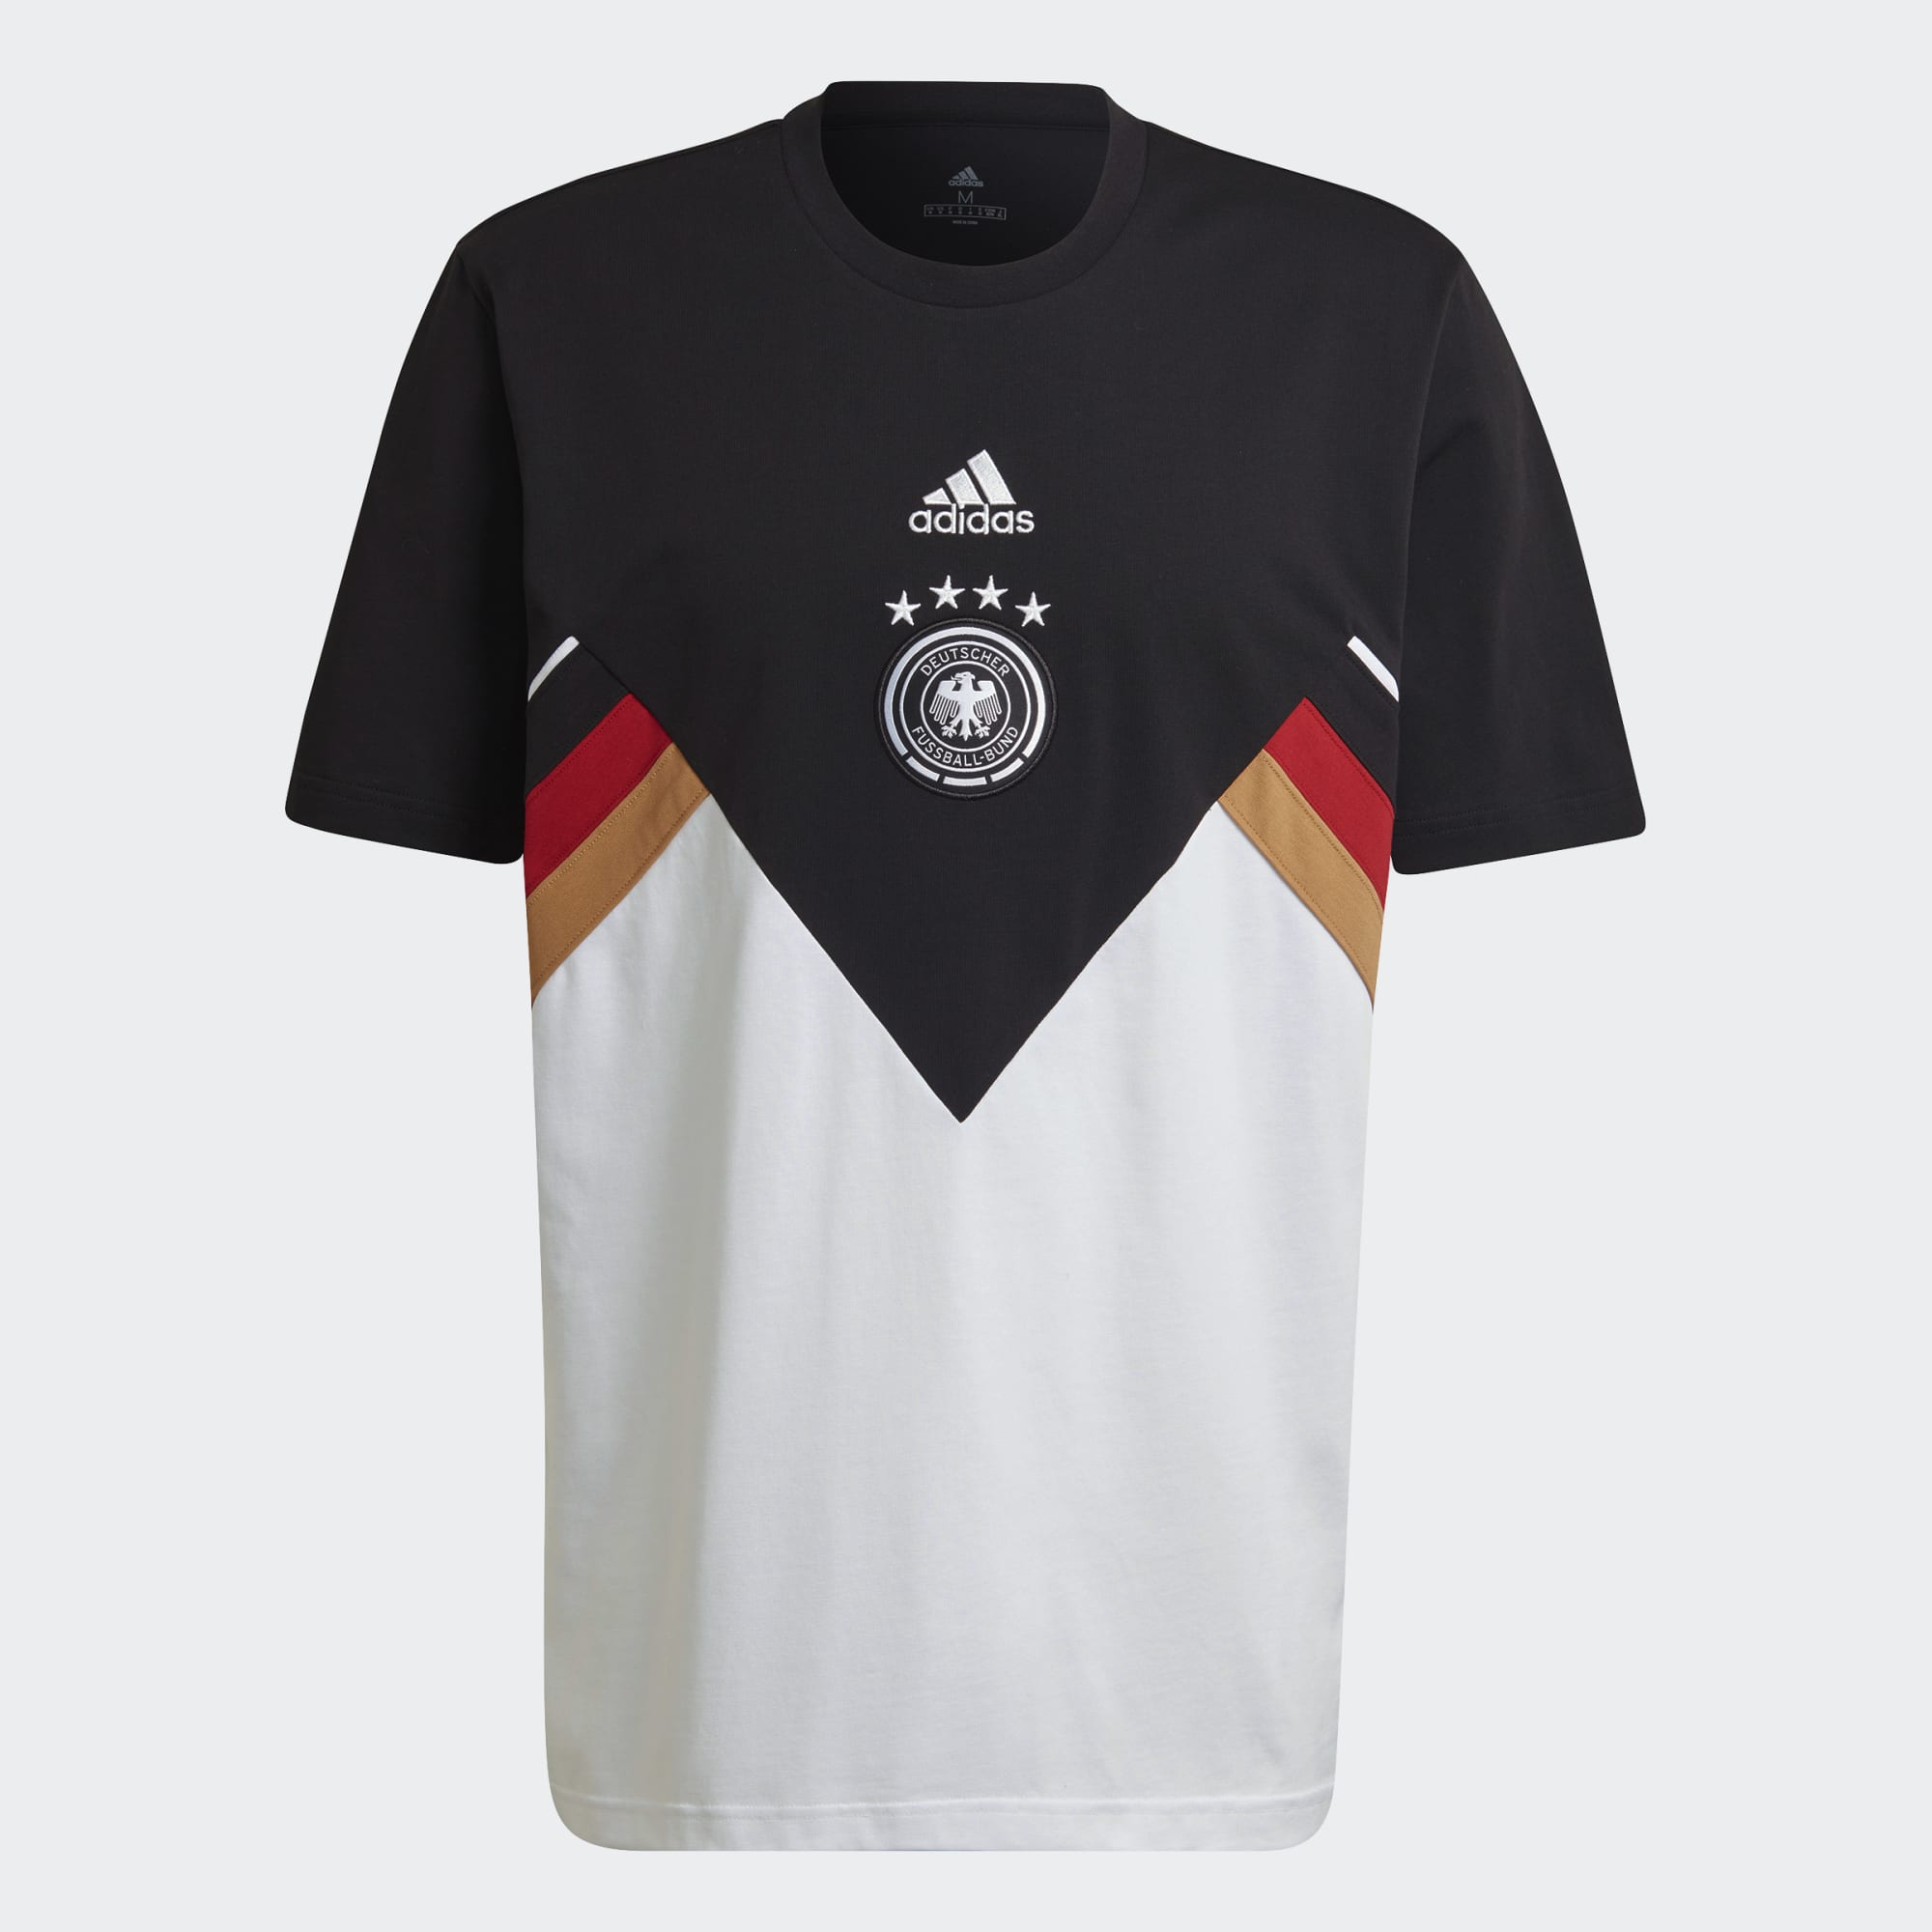 stefanssoccer.com:adidas Germany Icon Heavy Cotton Tee Black /